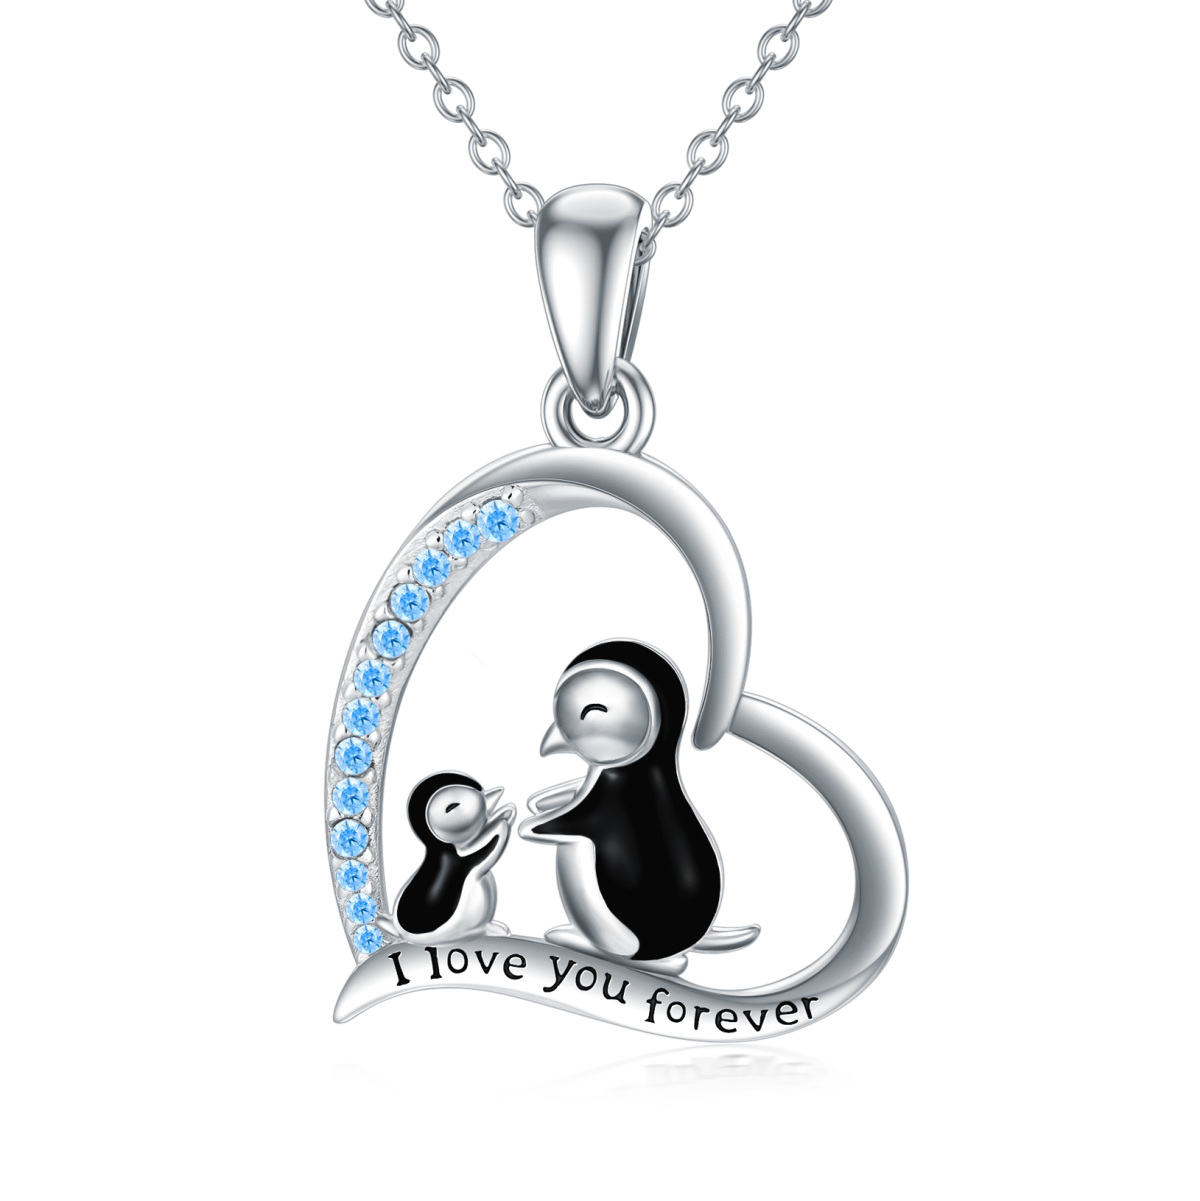 Sterling Silver Circular Shaped Zircon Penguin Pendant Necklace with Engraved Word-1